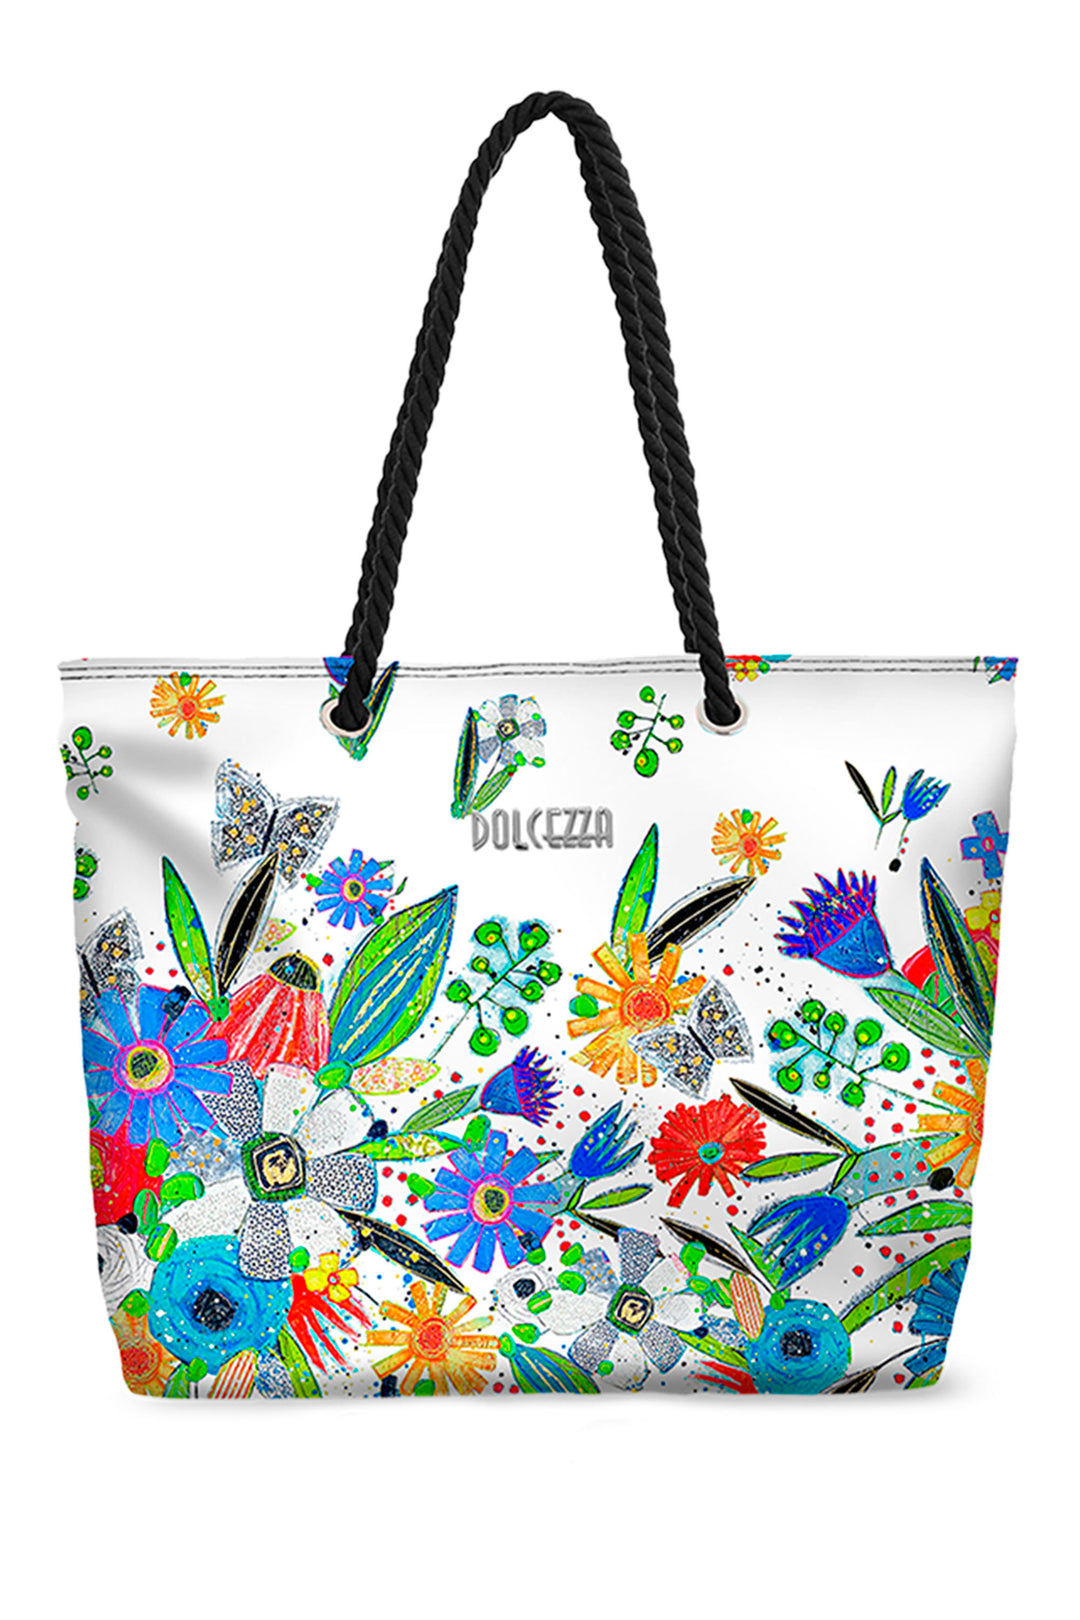 Dolcezza Spring 2024 Take your new tote to the beach or keep it around the house, you choose! Featuring a full length zipper closure and lovely twisted rope sturdy handles.